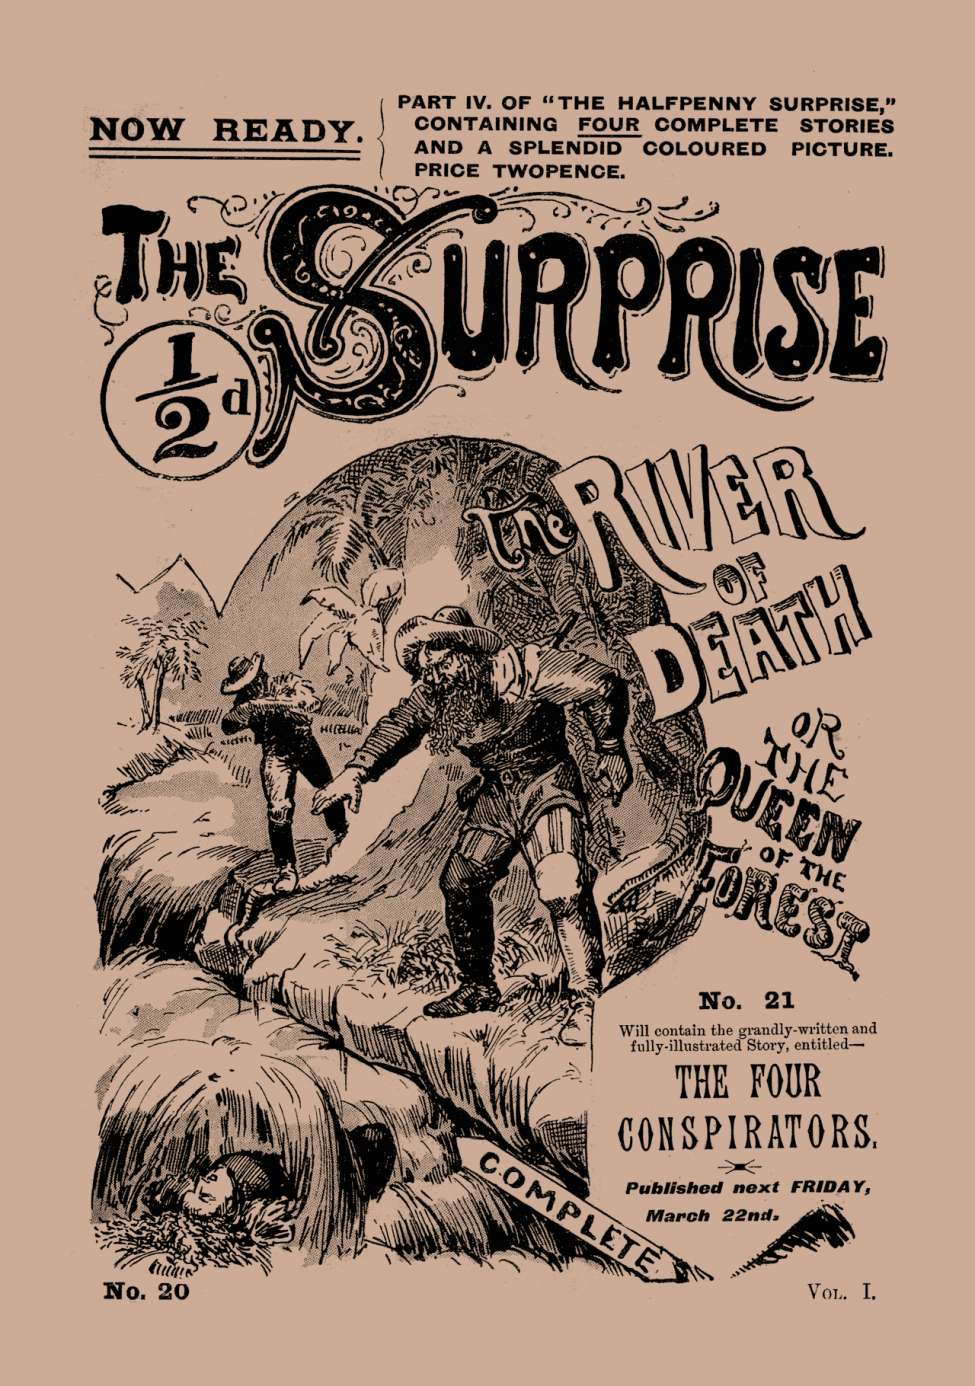 Book Cover For Halfpenny Surprise 20